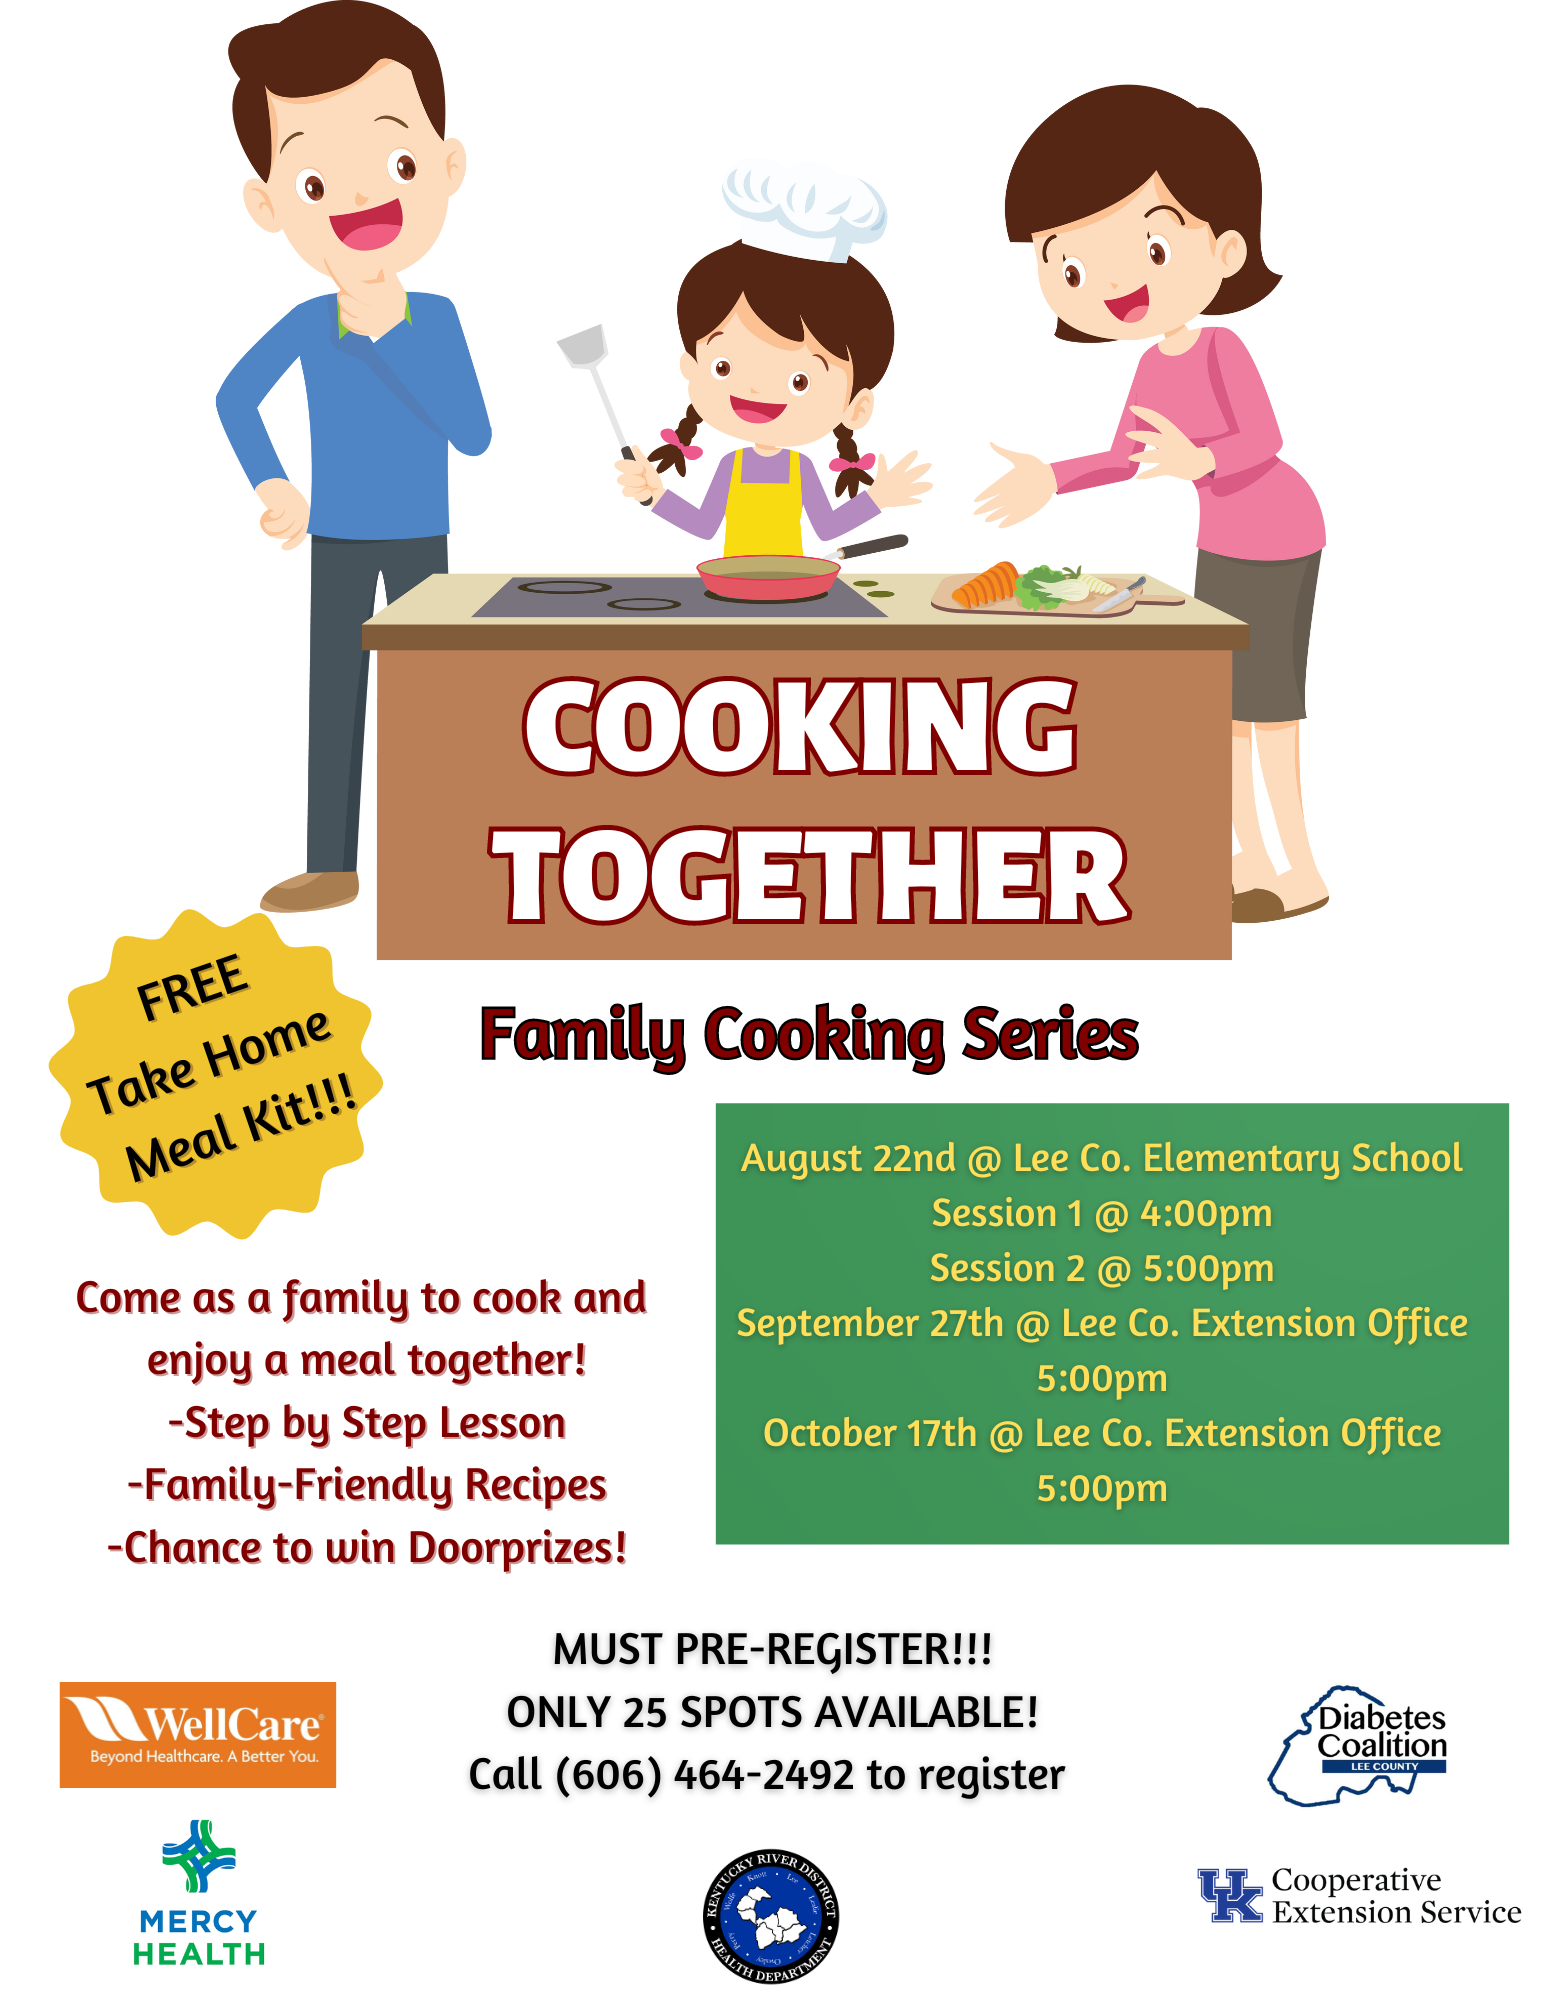 Family Cooking Series - Free Take Home Meal Kit!!